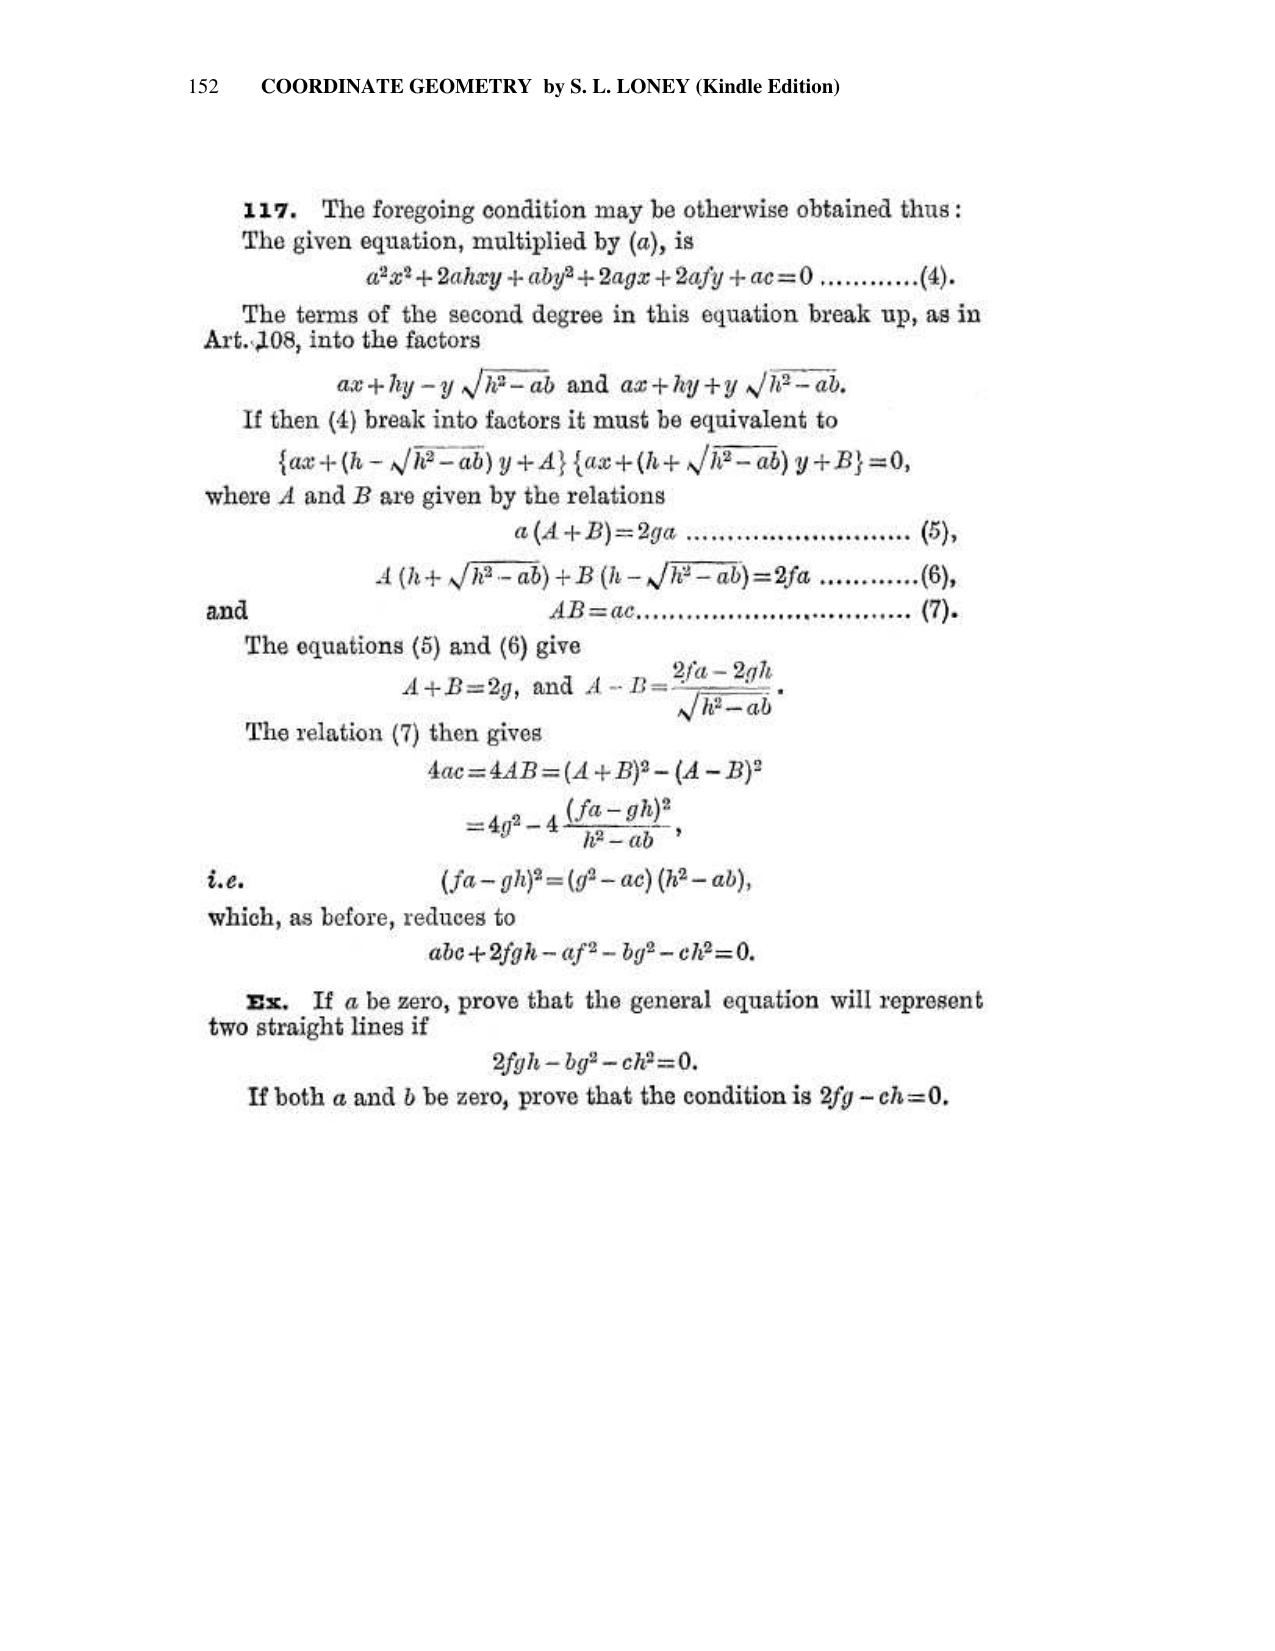 Chapter 6: On Equations Representing Two or More Straight Lines - SL Loney Solutions: The Elements of Coordinate Geometry - Page 13